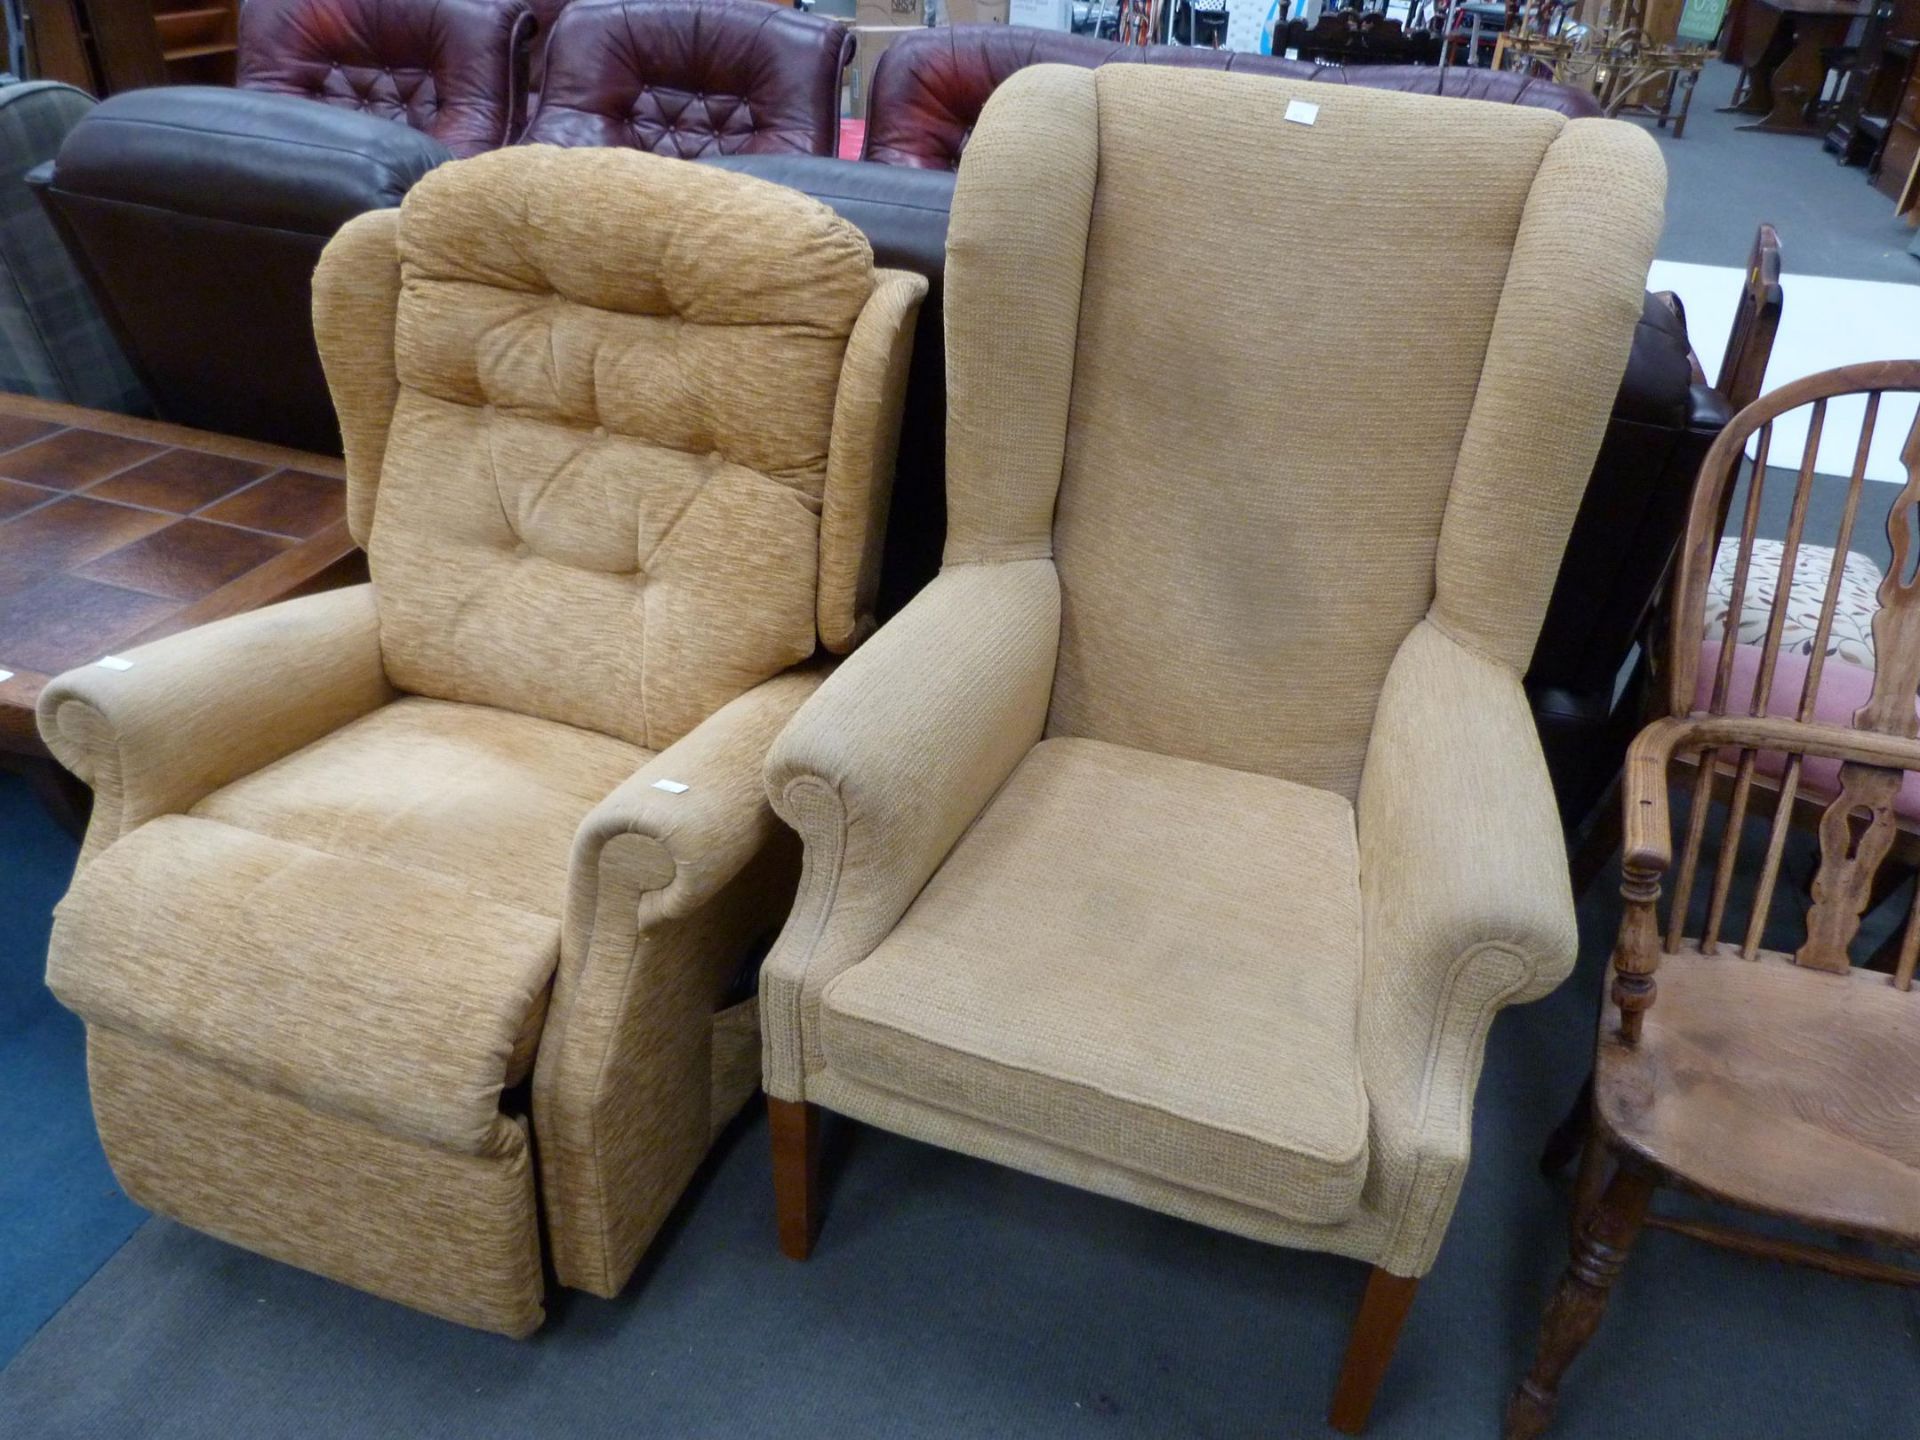 An Electric Recliner Chair in sand velour & a similar Grand Father Chair (2) (est. £50-£70)